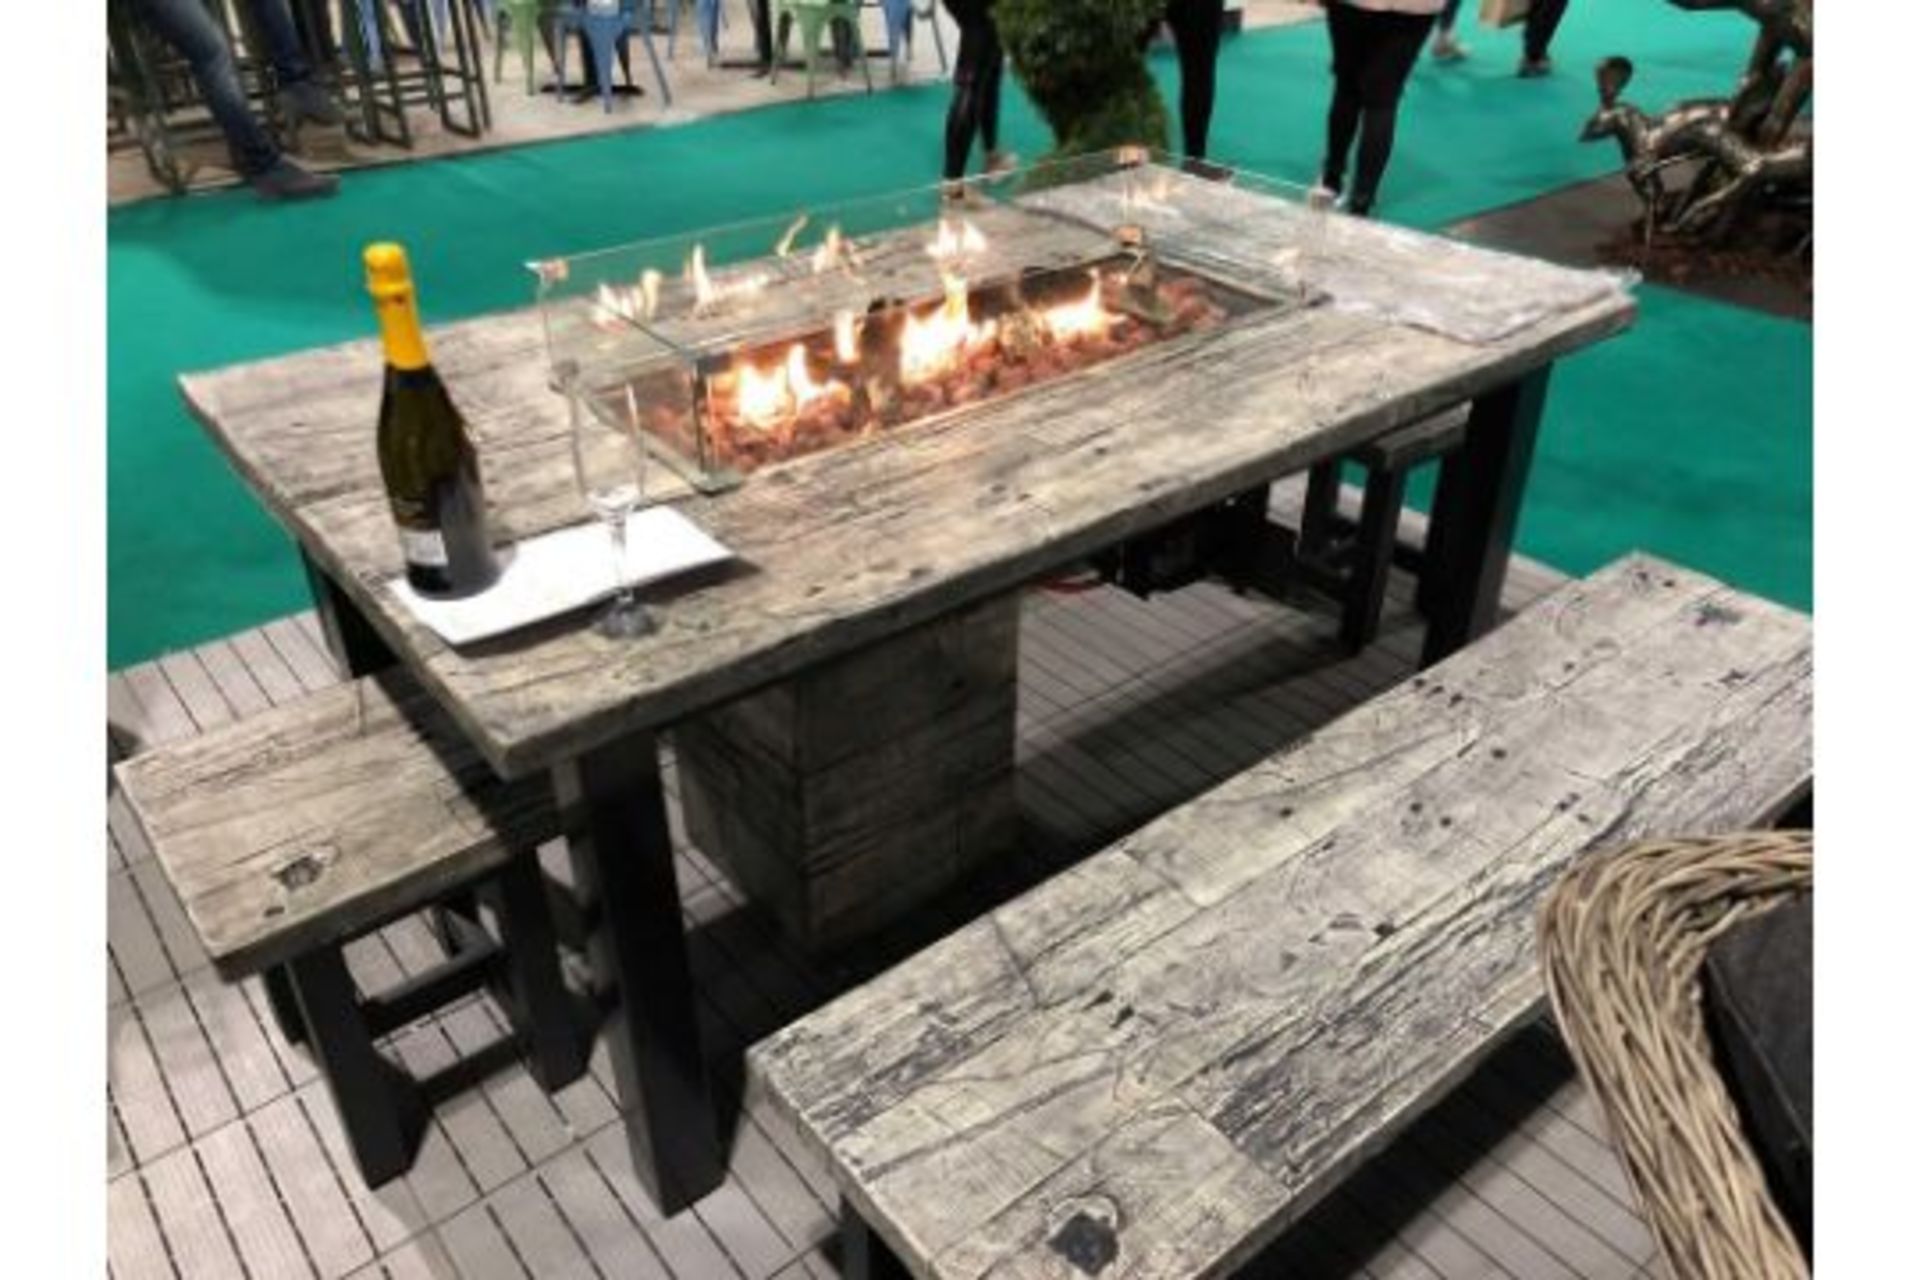 RRP £2495 Excalibur Fire Pit Table That Looks Like Wood But It'S Concrete Comes With 2 Benches And 2